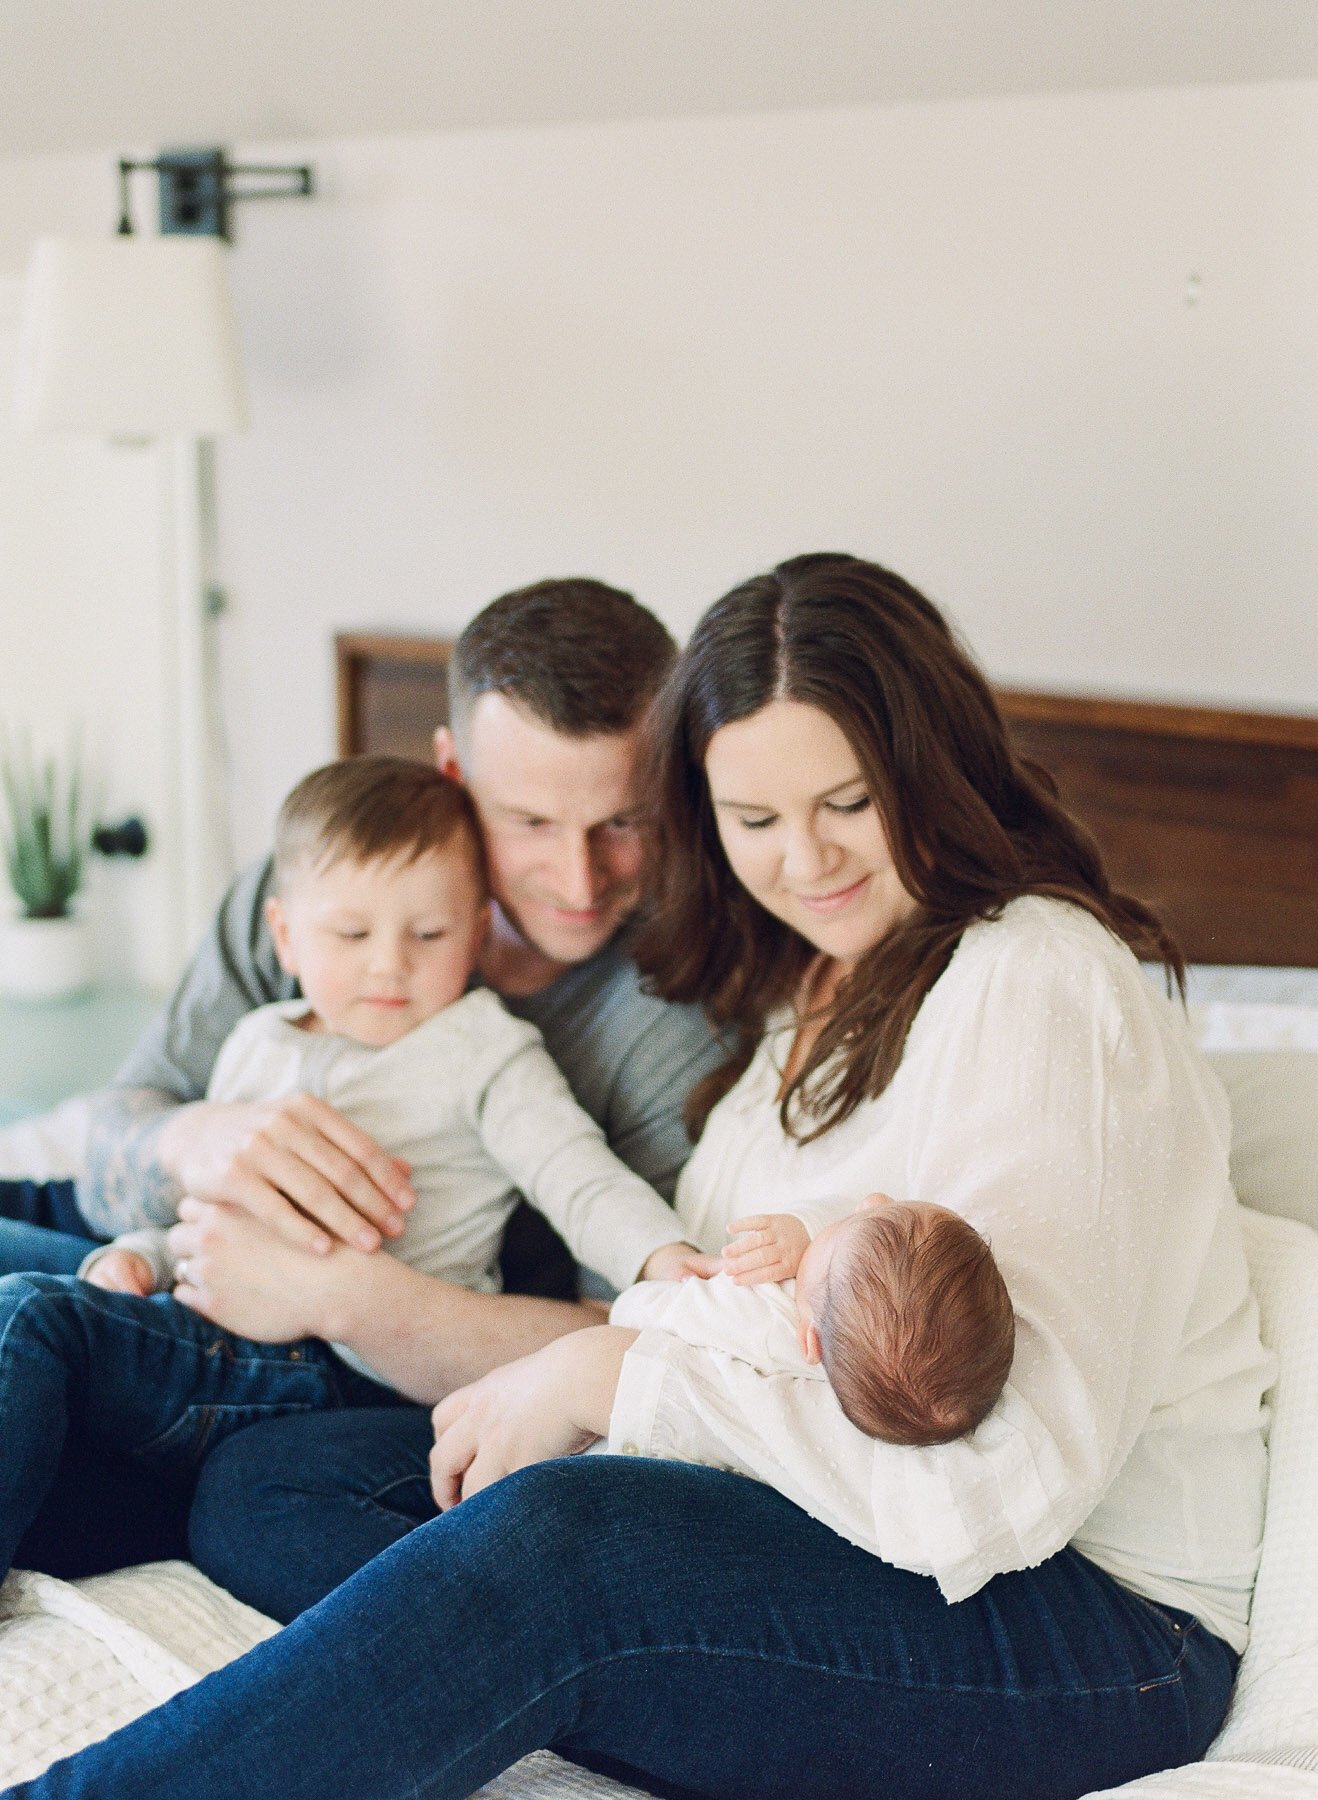 Saratoga Springs NY family and newborn photography by Michelle Lange Photography-19.jpg